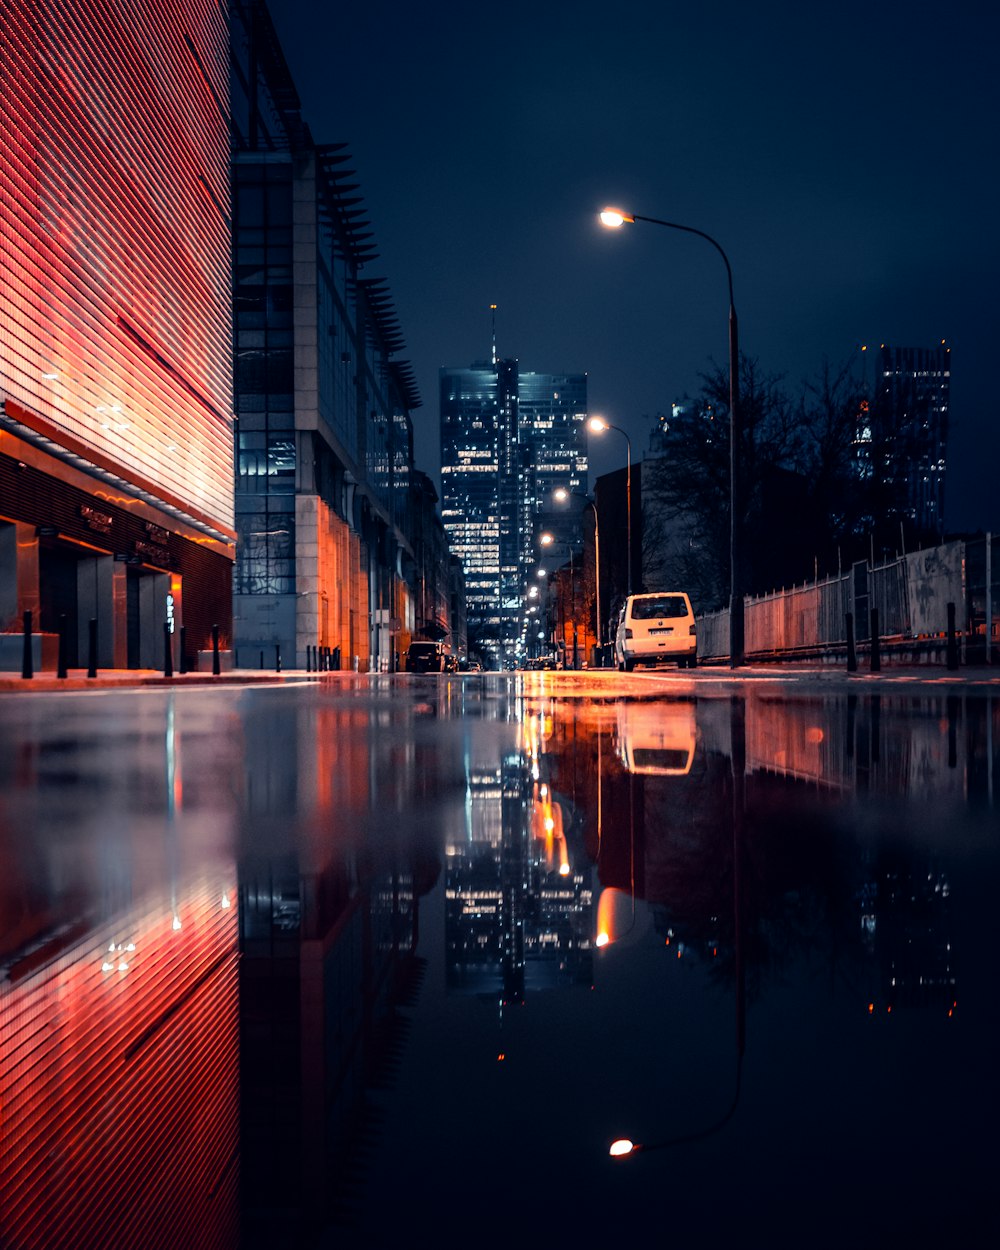 a city street at night with a reflection in the water